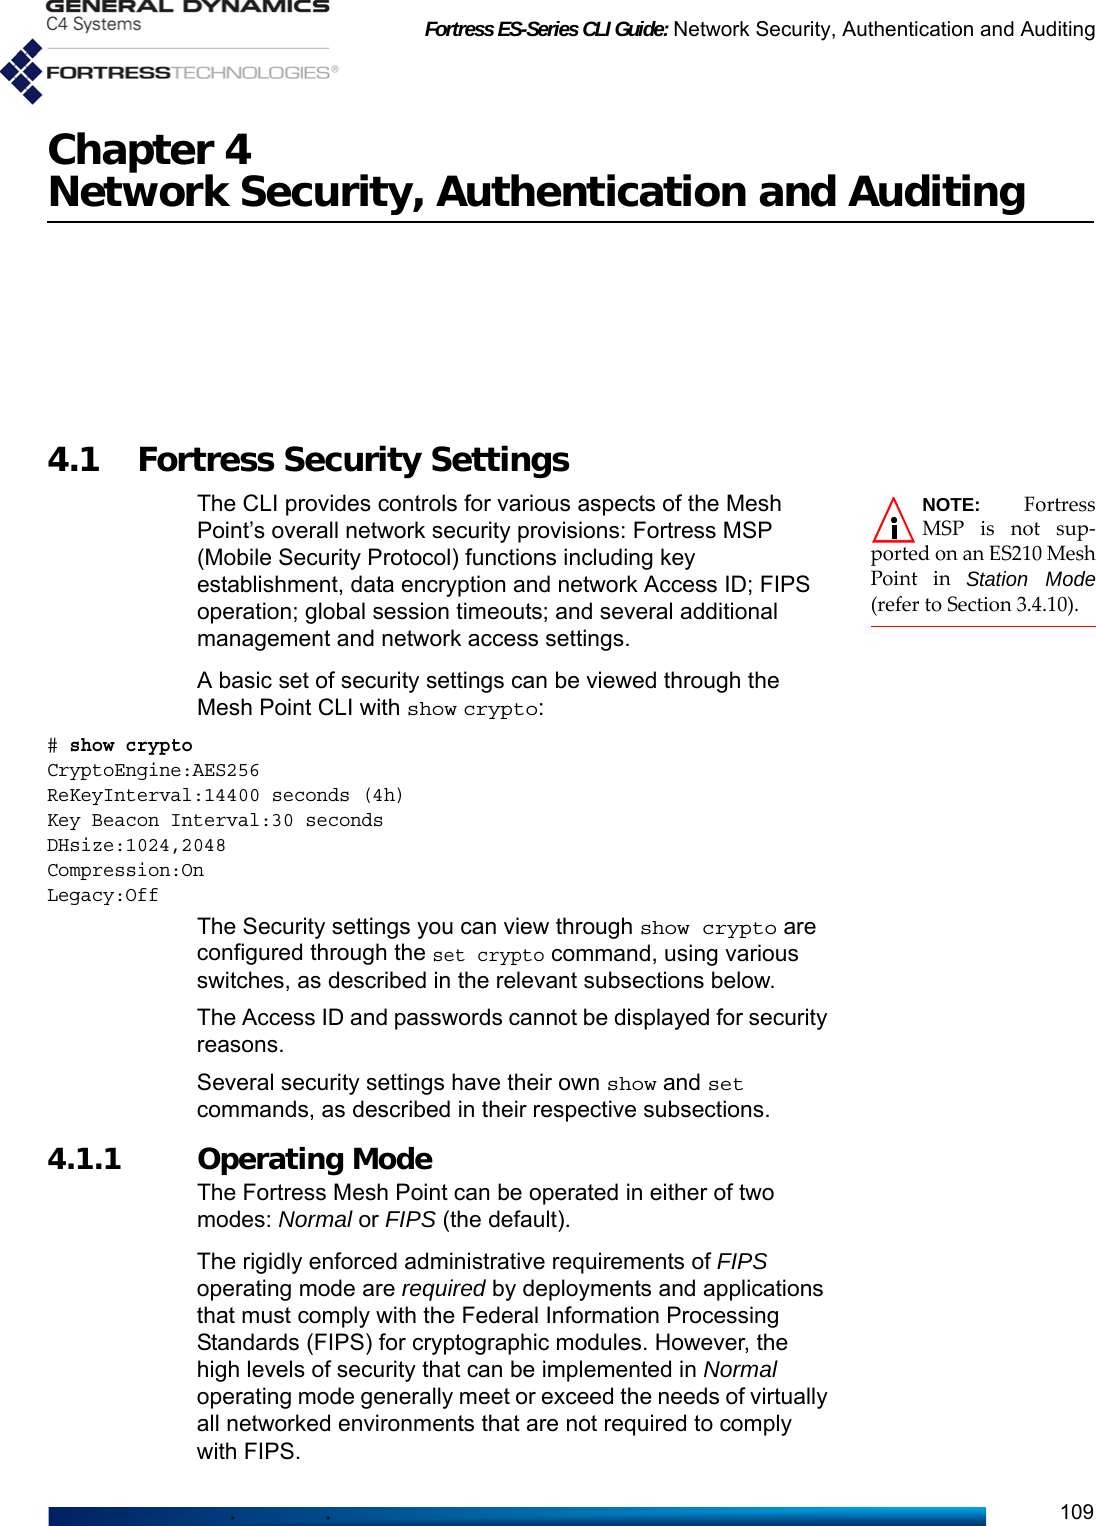 Fortress ES-Series CLI Guide: Network Security, Authentication and Auditing109Chapter 4Network Security, Authentication and Auditing4.1 Fortress Security Settings NOTE: FortressMSP is not sup-ported on an ES210 MeshPoint in Station Mode(refer to Section 3.4.10).The CLI provides controls for various aspects of the Mesh Point’s overall network security provisions: Fortress MSP (Mobile Security Protocol) functions including key establishment, data encryption and network Access ID; FIPS operation; global session timeouts; and several additional management and network access settings.A basic set of security settings can be viewed through the Mesh Point CLI with show crypto:# show cryptoCryptoEngine:AES256ReKeyInterval:14400 seconds (4h)Key Beacon Interval:30 secondsDHsize:1024,2048Compression:OnLegacy:Off The Security settings you can view through show crypto are configured through the set crypto command, using various switches, as described in the relevant subsections below.The Access ID and passwords cannot be displayed for security reasons.Several security settings have their own show and set commands, as described in their respective subsections.4.1.1 Operating Mode The Fortress Mesh Point can be operated in either of two modes: Normal or FIPS (the default).The rigidly enforced administrative requirements of FIPS operating mode are required by deployments and applications that must comply with the Federal Information Processing Standards (FIPS) for cryptographic modules. However, the high levels of security that can be implemented in Normal operating mode generally meet or exceed the needs of virtually all networked environments that are not required to comply with FIPS.